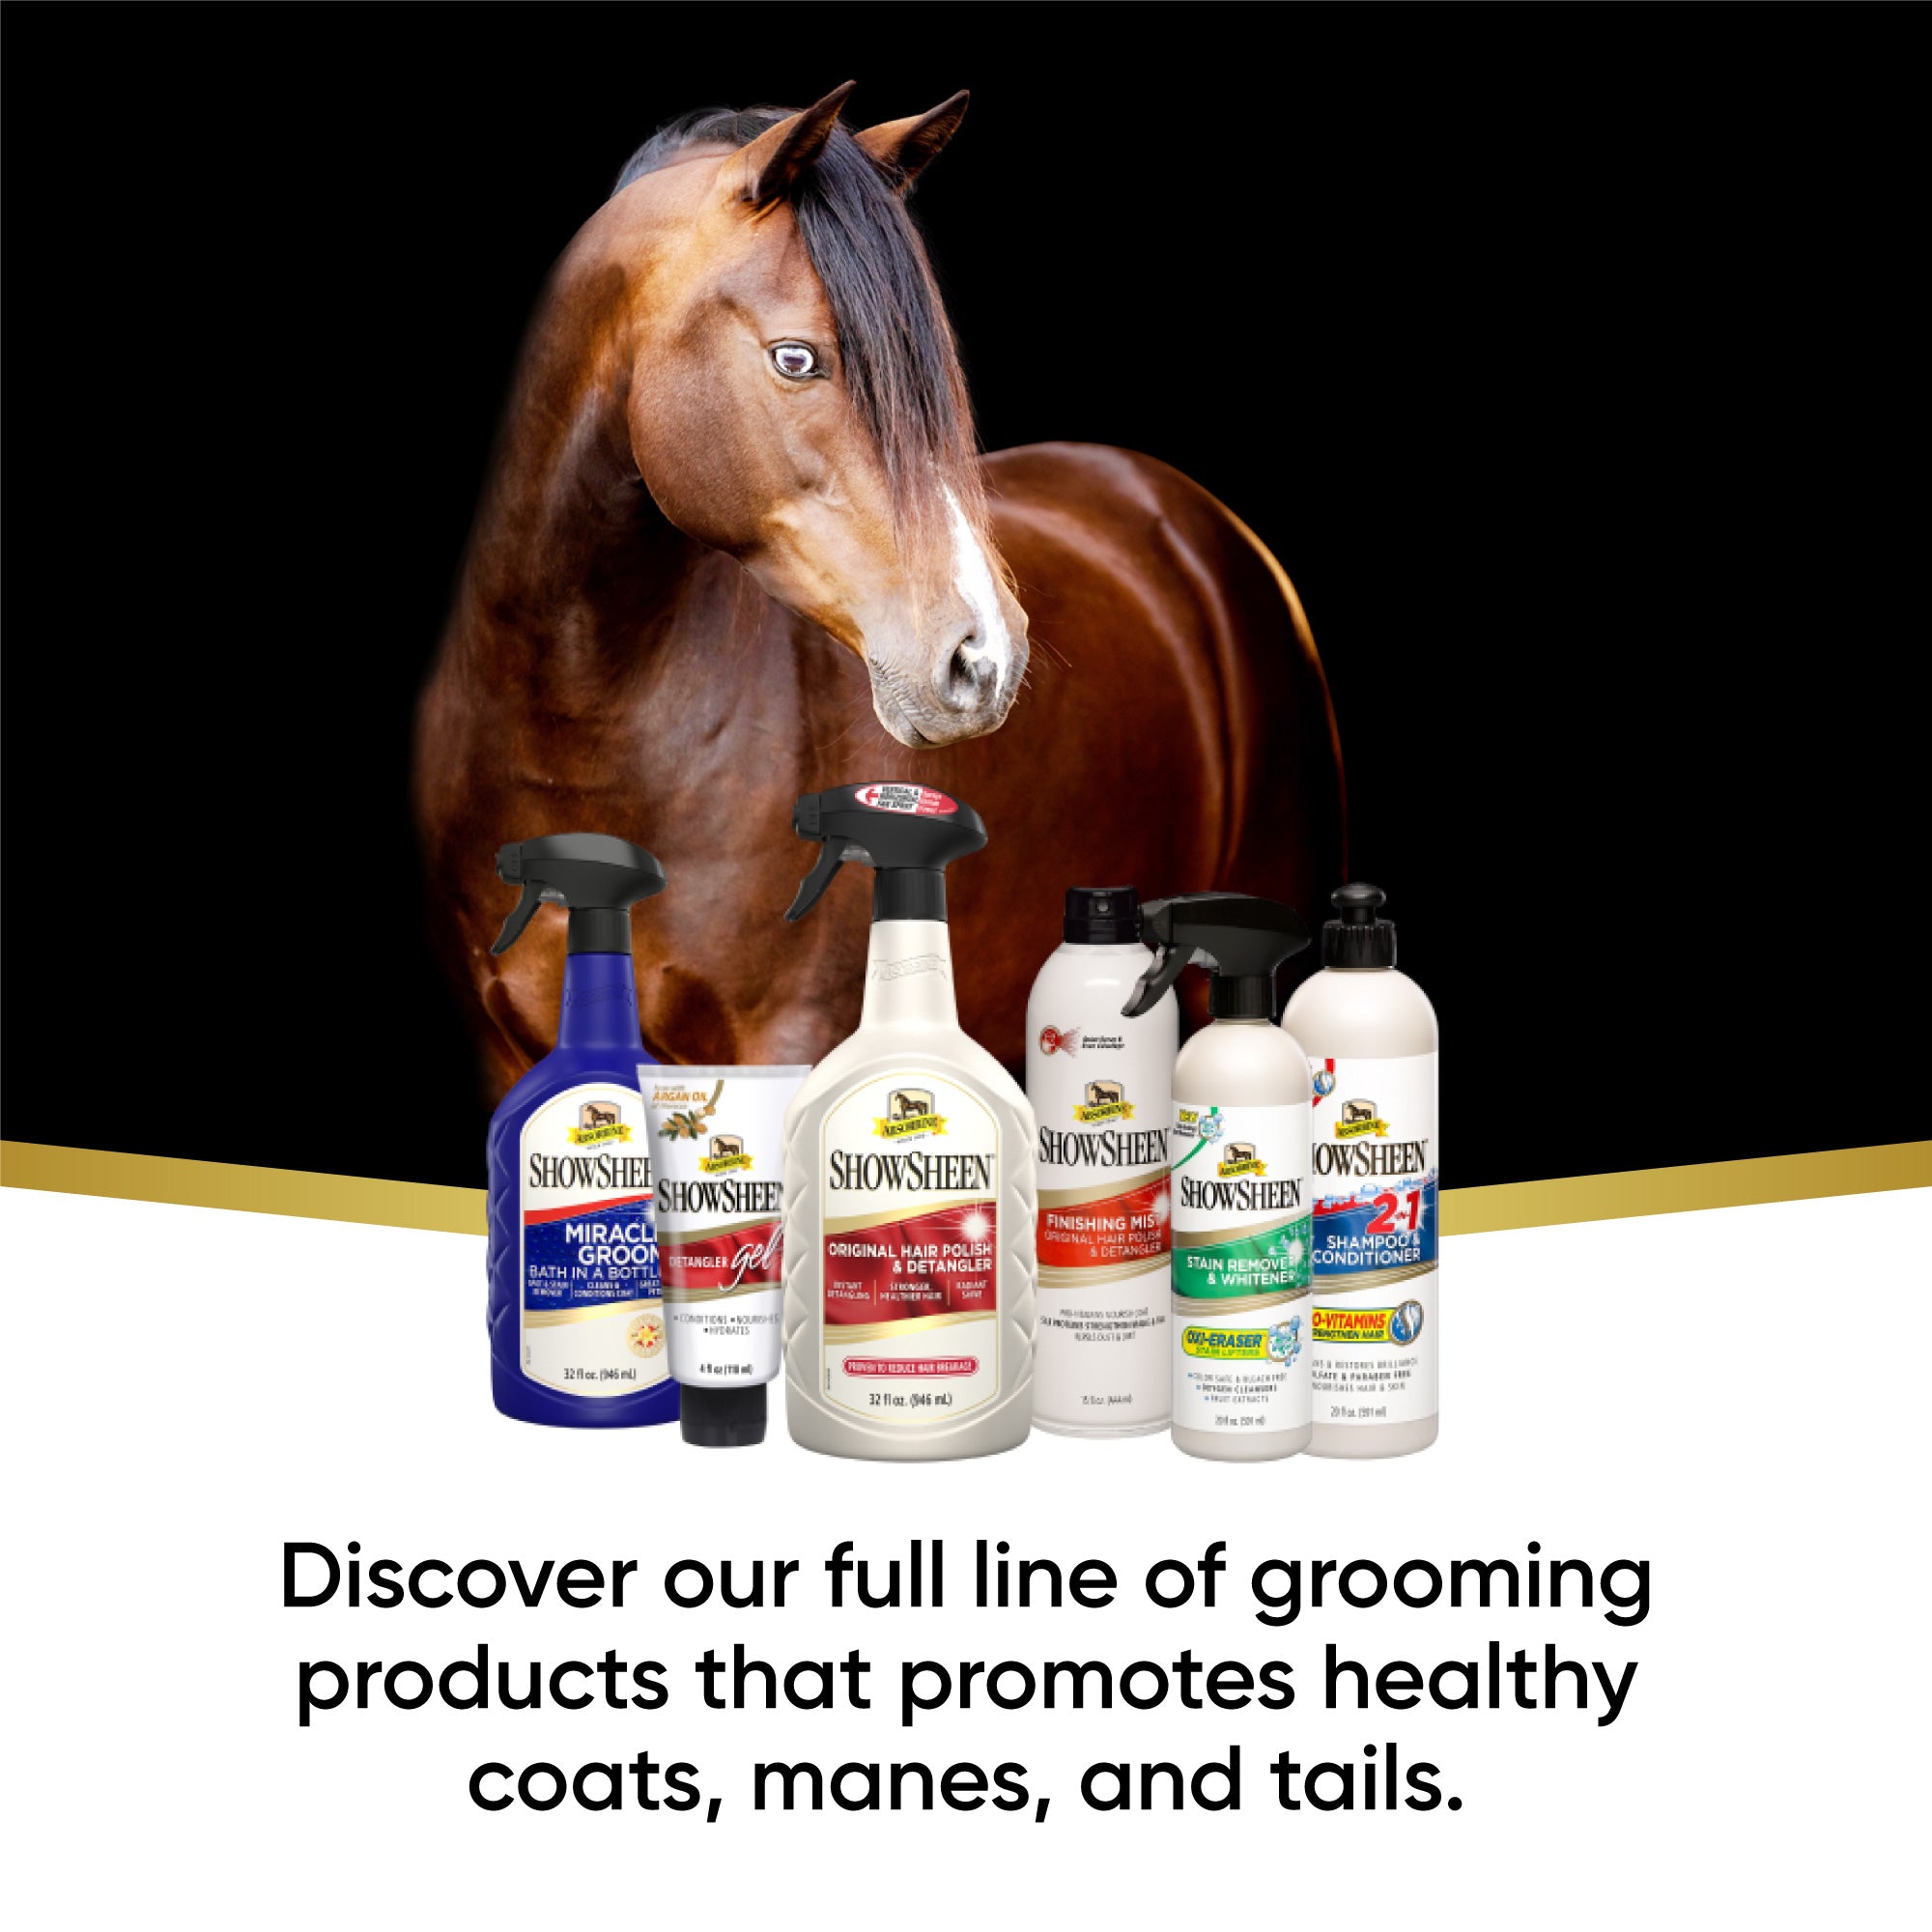 Horse standing behind full line of Absorbine Showsheen products.  Discover our full line of grooming products that promotes healthy coats, manes, and tails.